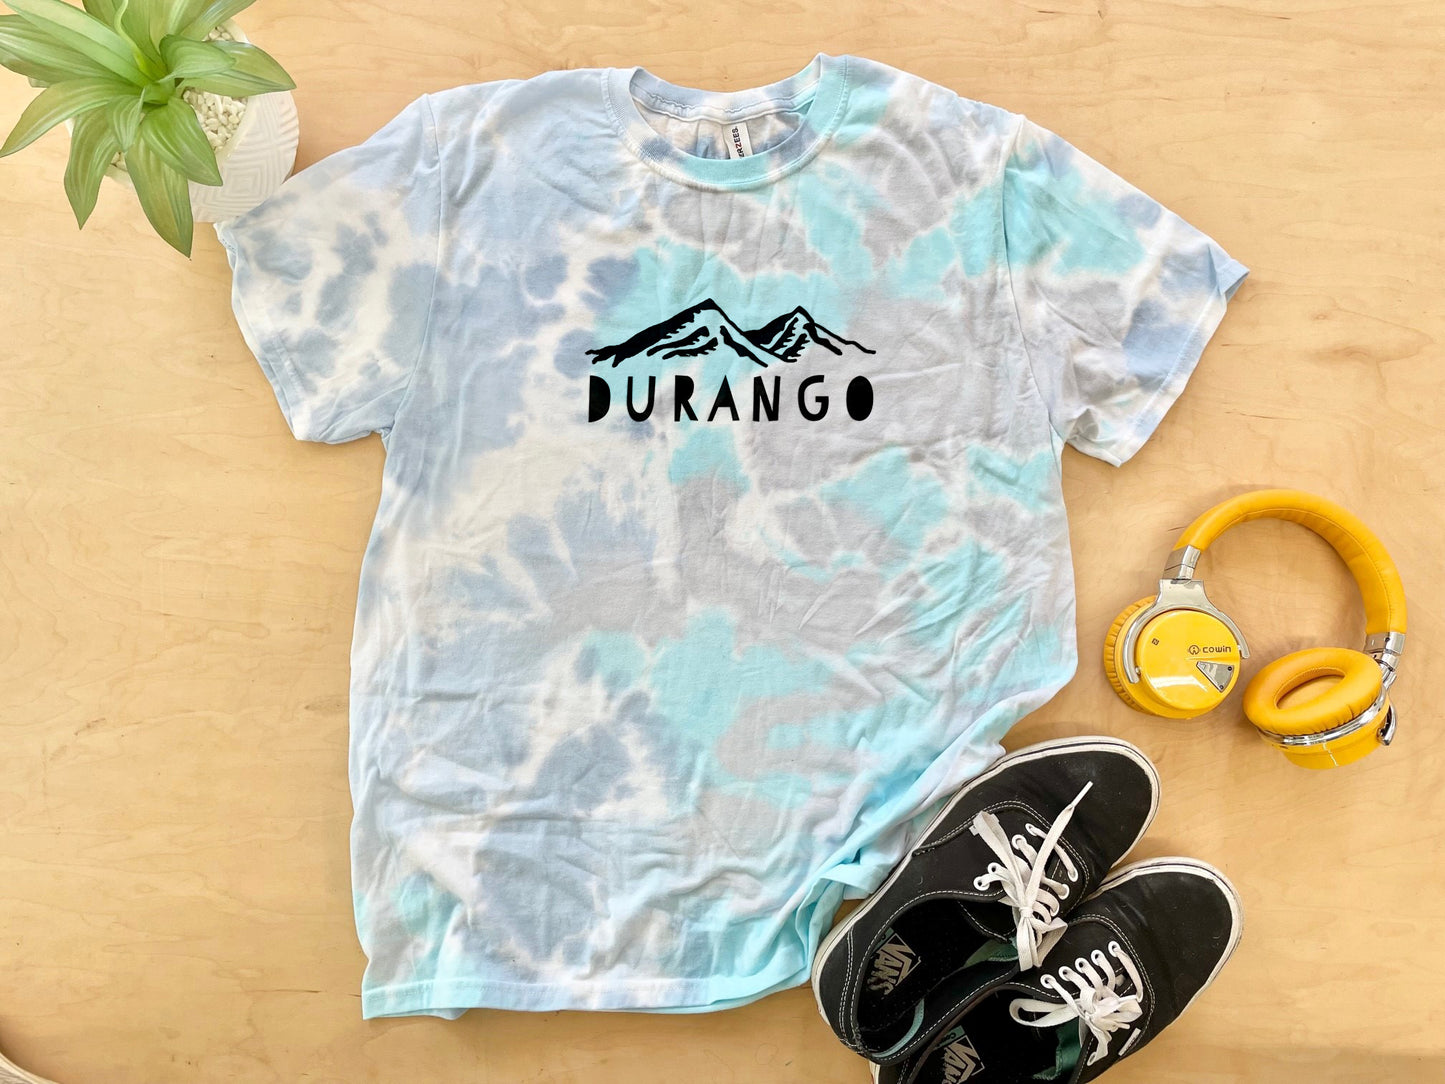 a t - shirt with the word durano on it next to headphones and